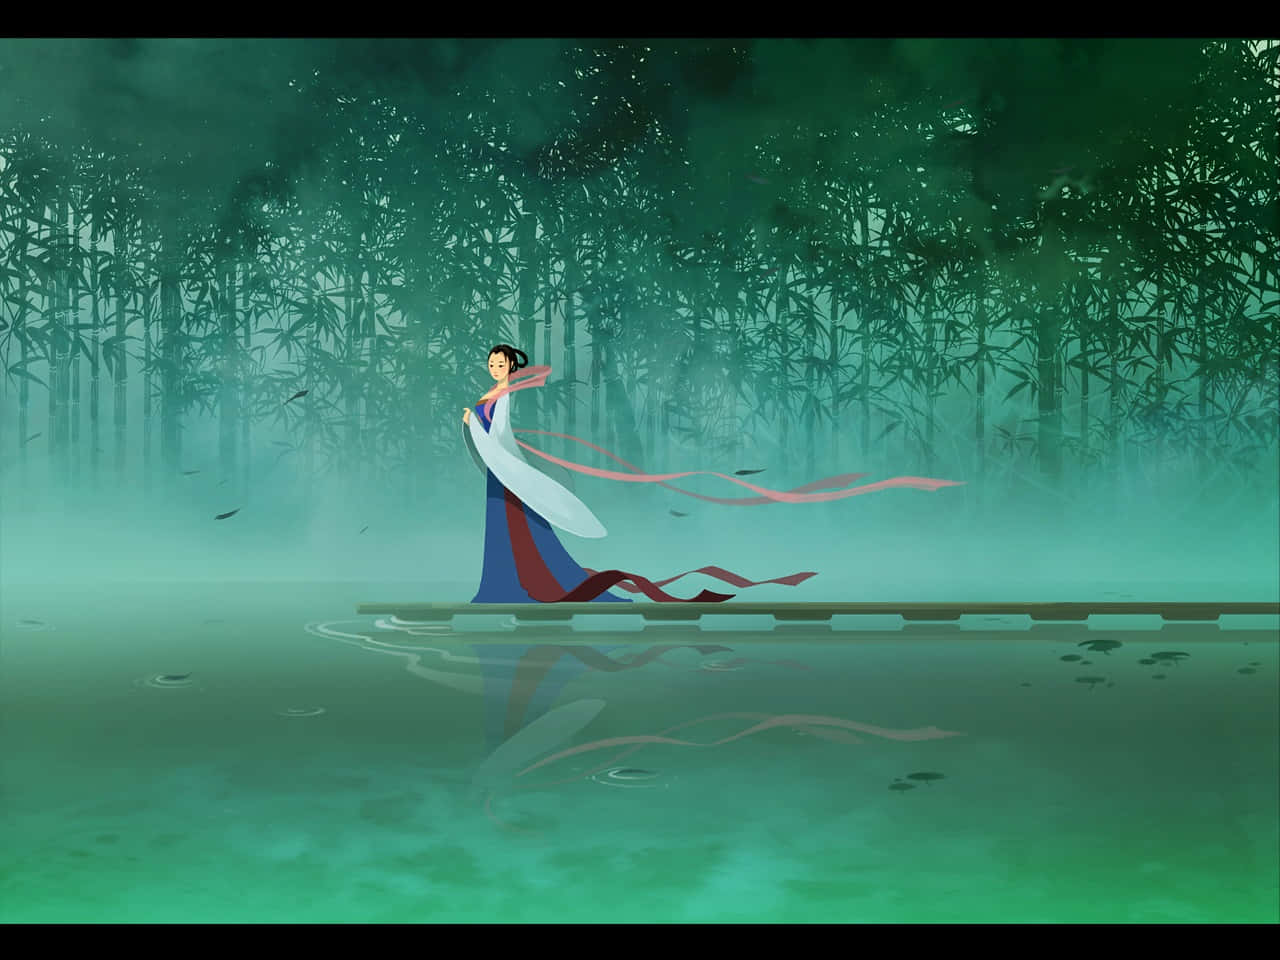 The Brave Warrior From Disney's Mulan